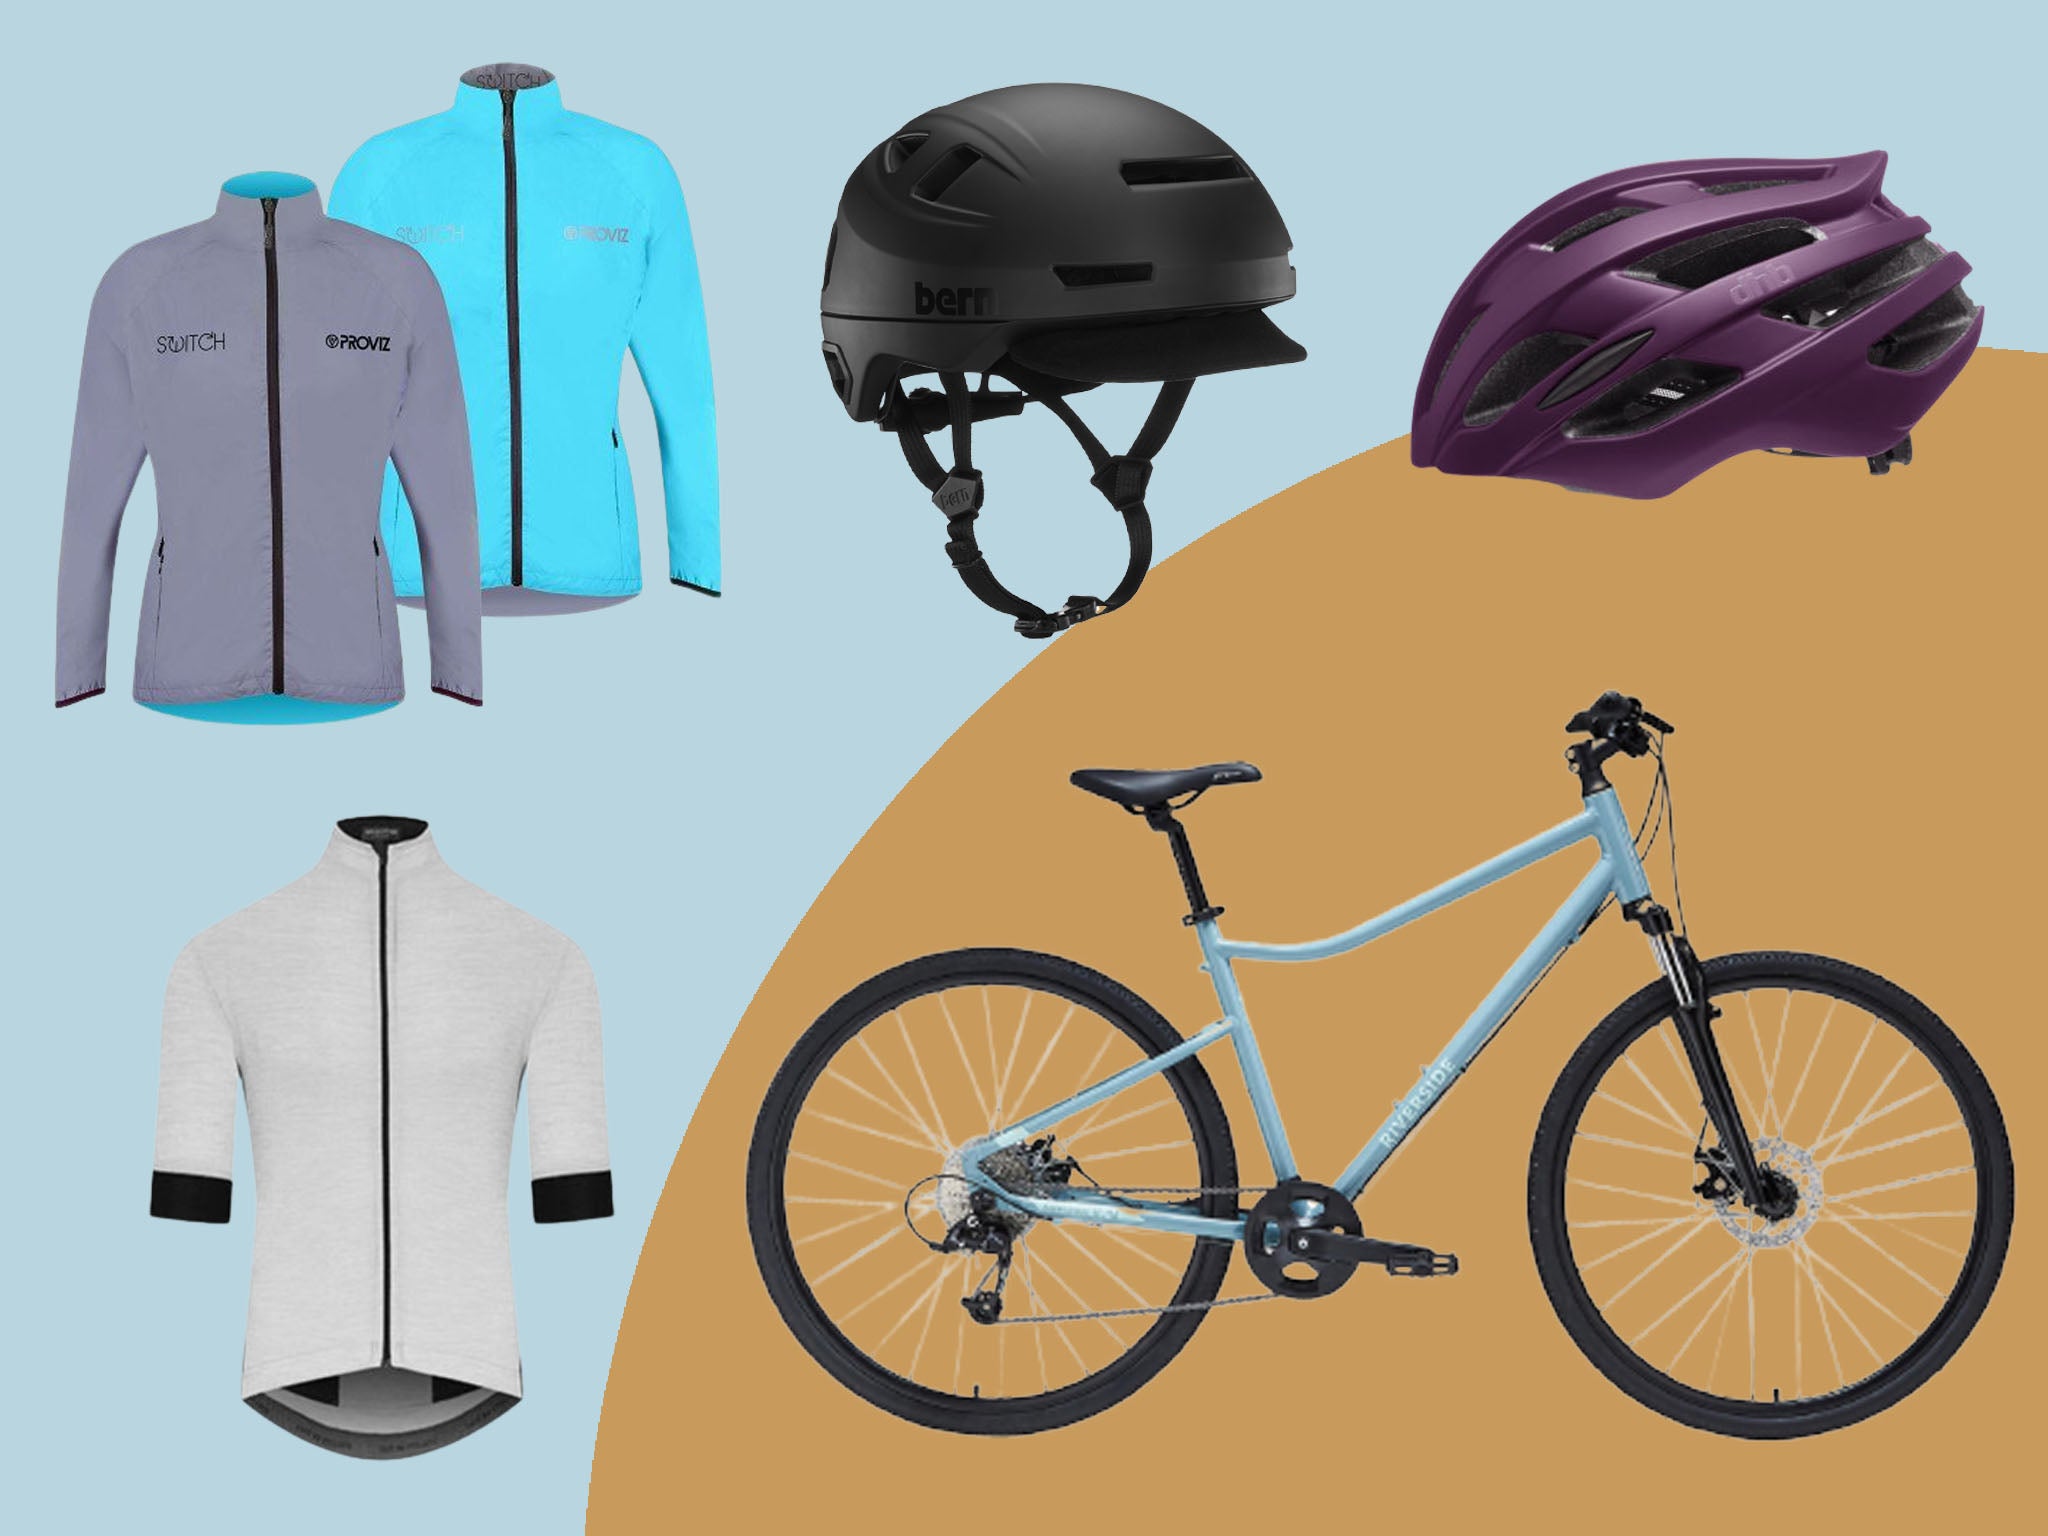 We’ve rounded up the best of the best kit for both beginners and experienced racers alike